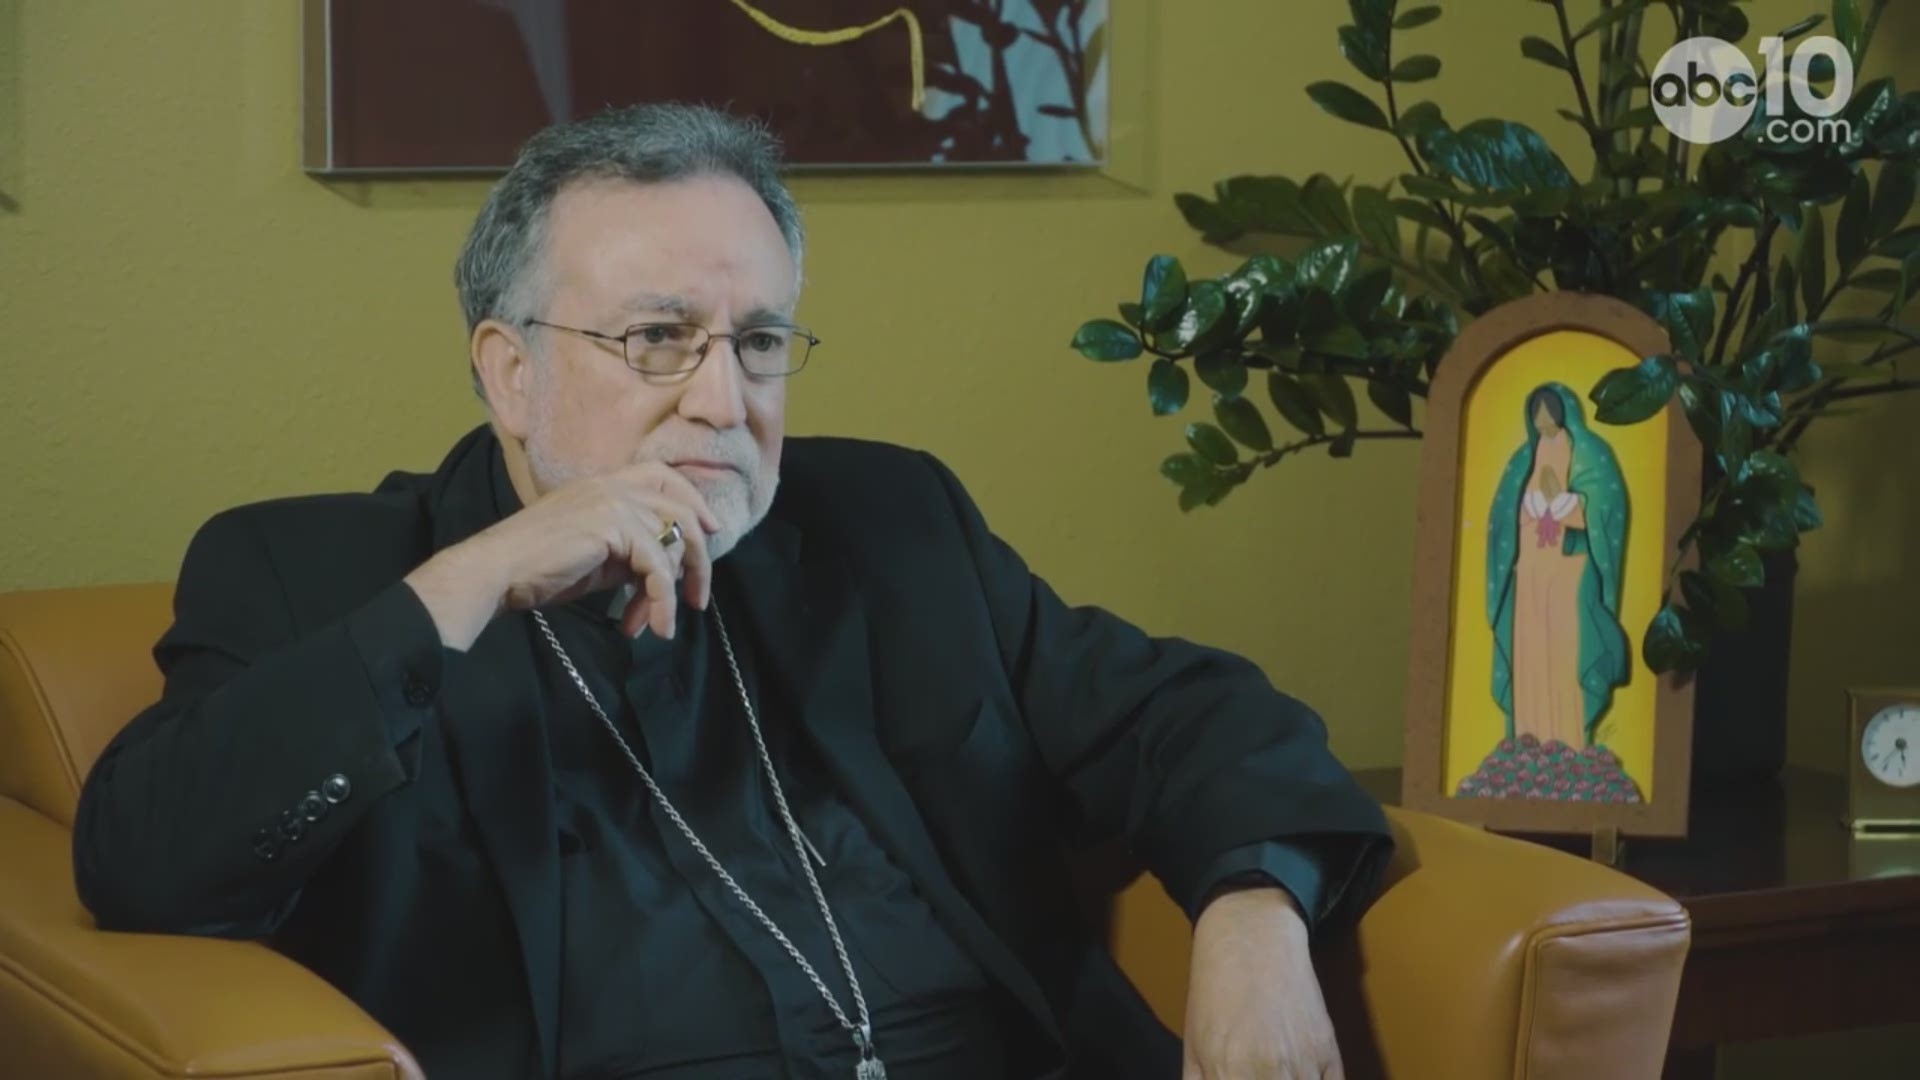 Bishop Jaime Soto is speaking with us in his first sit down interview since revealing the names of 44 priests and two deacons credibly accused of sexually abusing children and young adults over the past 70 years.